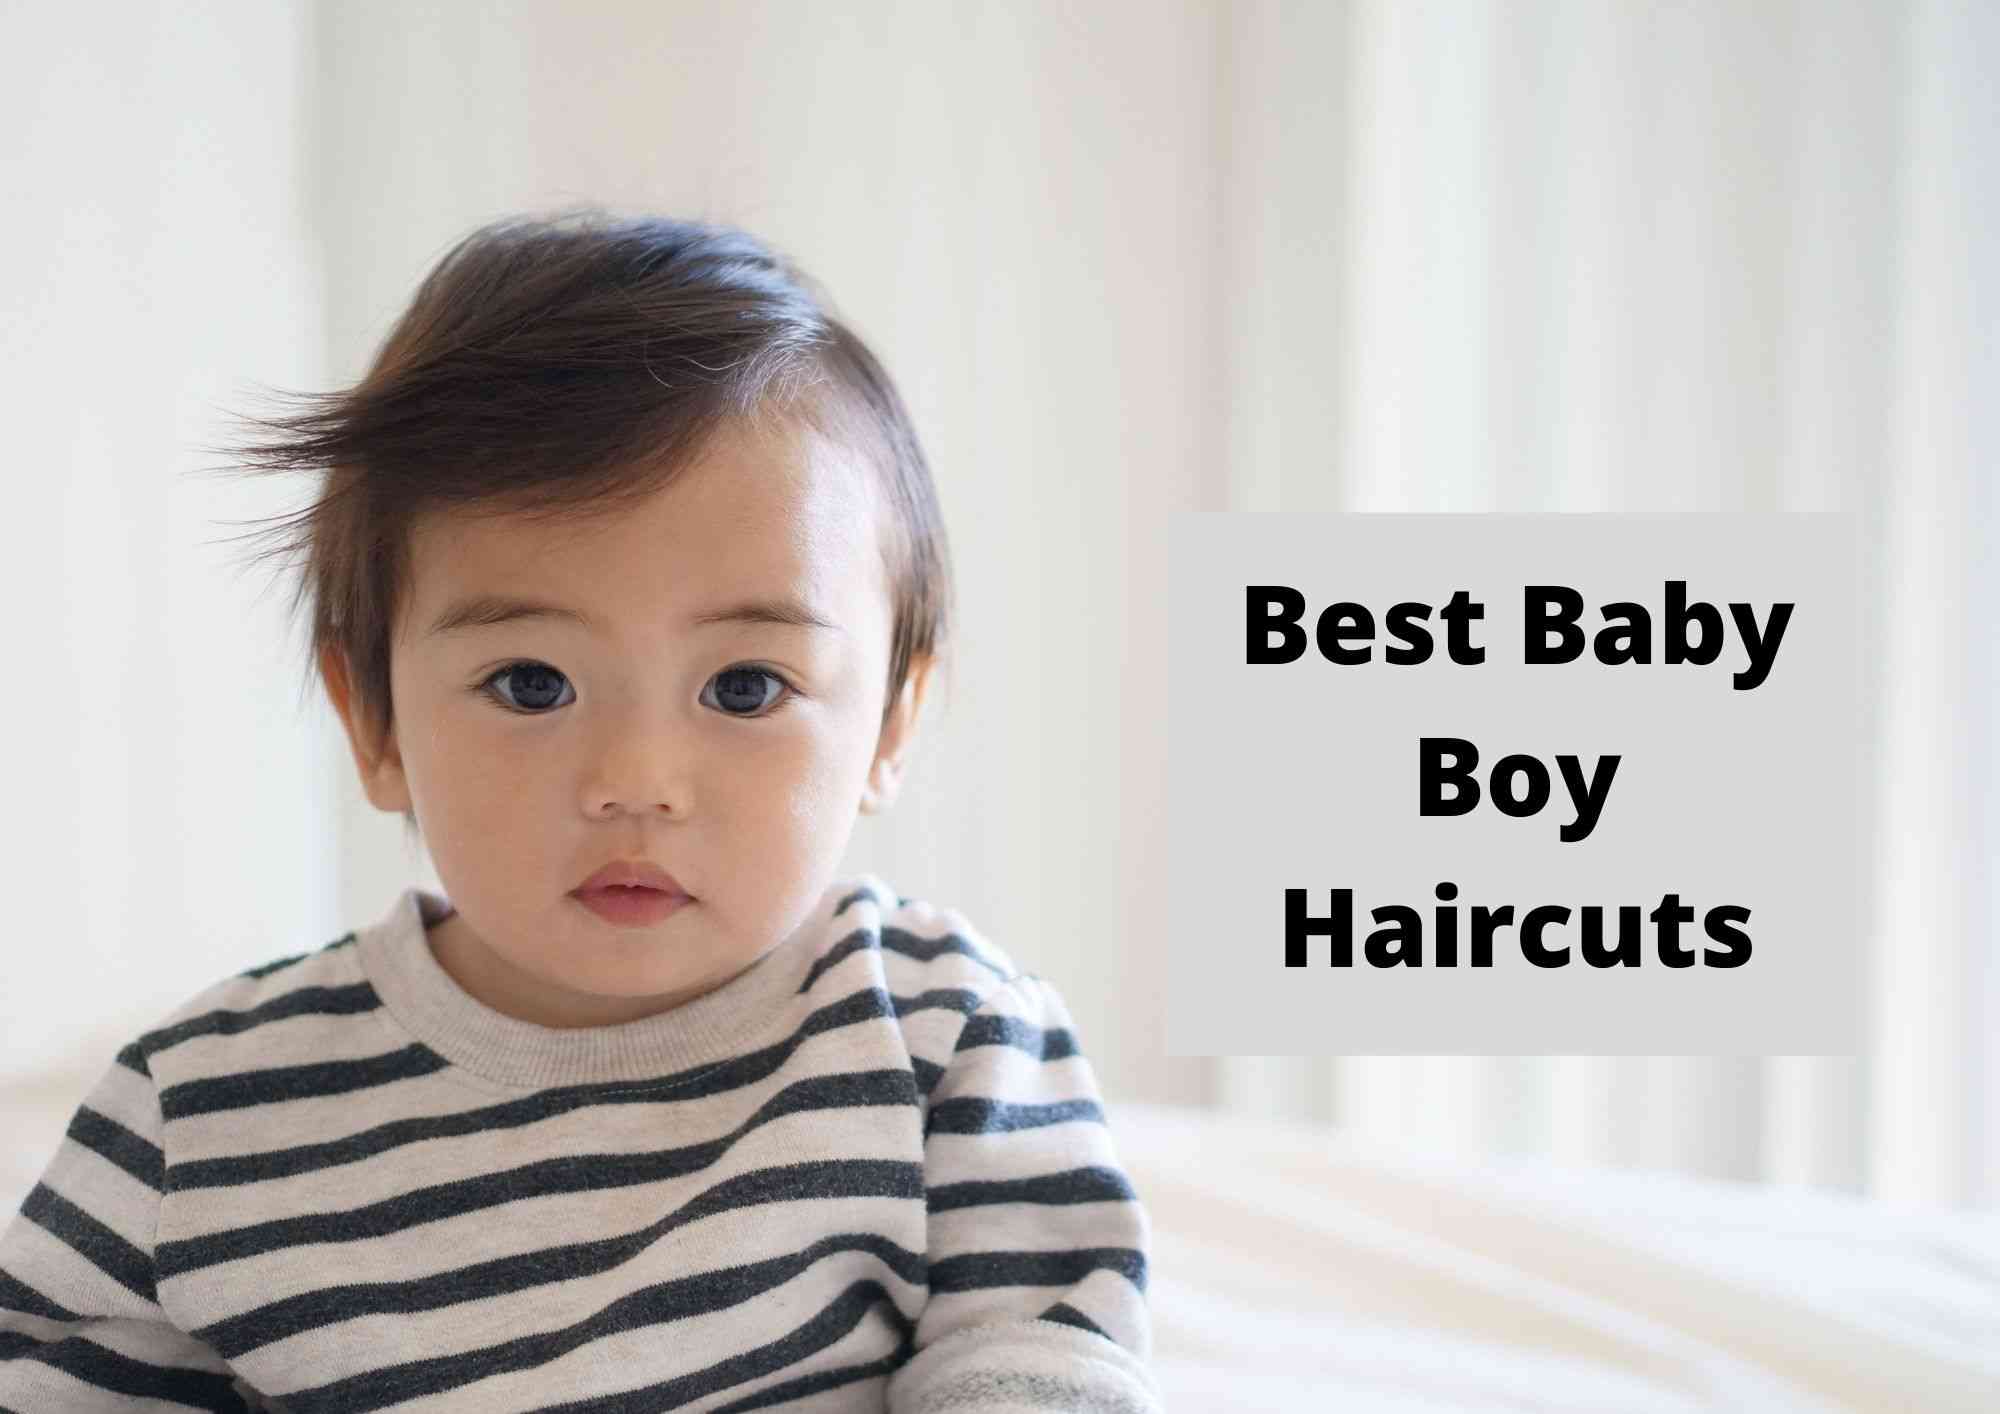 14 Best Baby Boy Haircuts In 2022 That